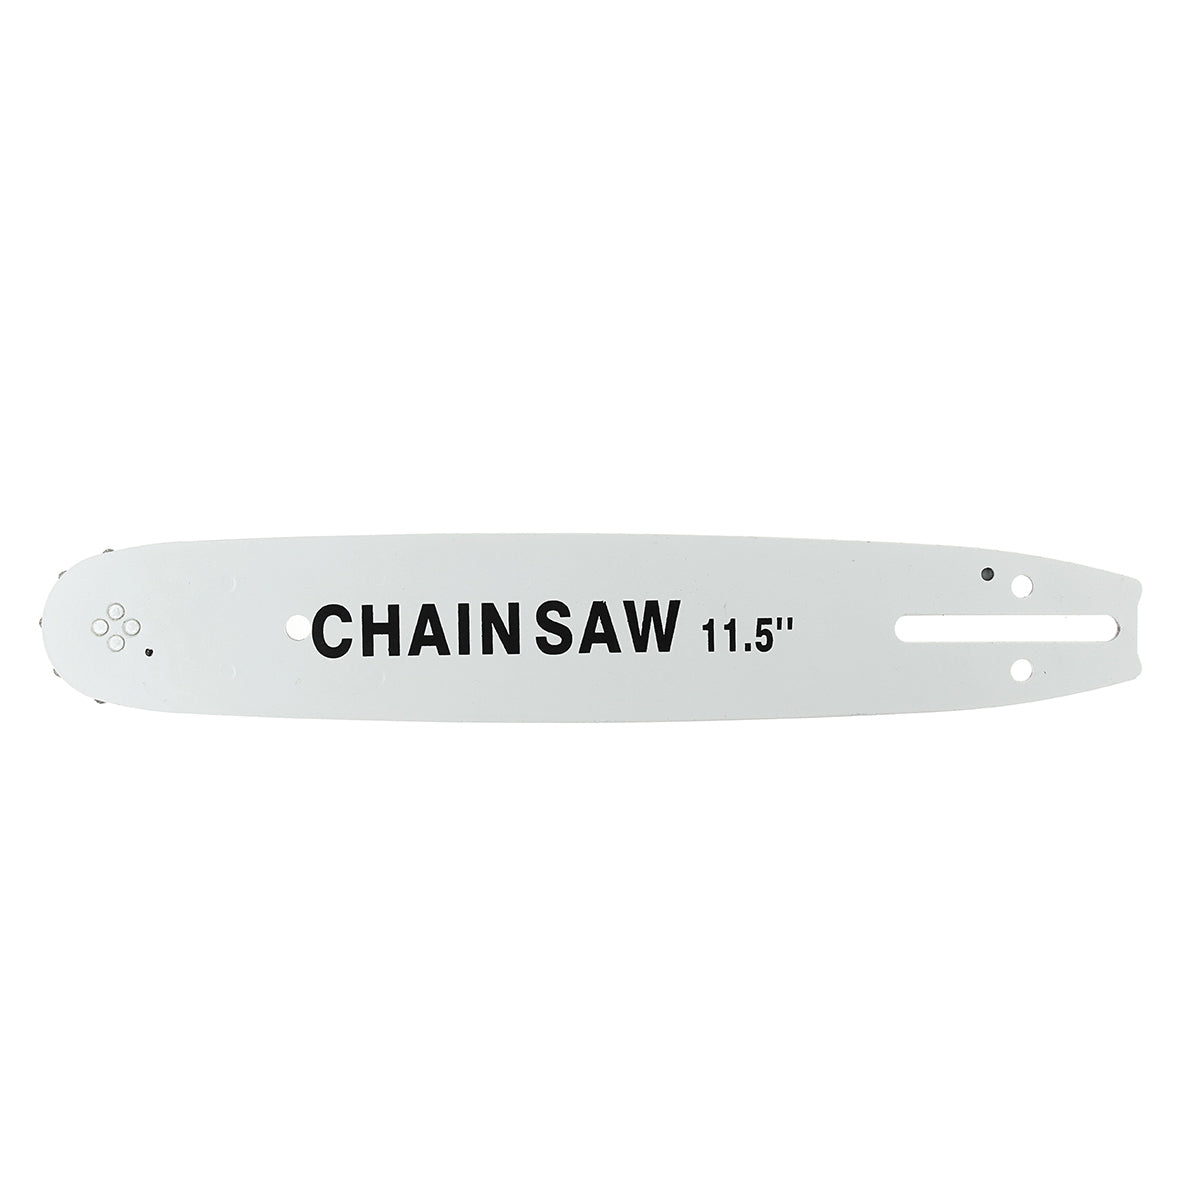 11.5 Inch Chainsaw Bracket Chain Saw Transfer Conversion Head set For 100 Angle Grinder